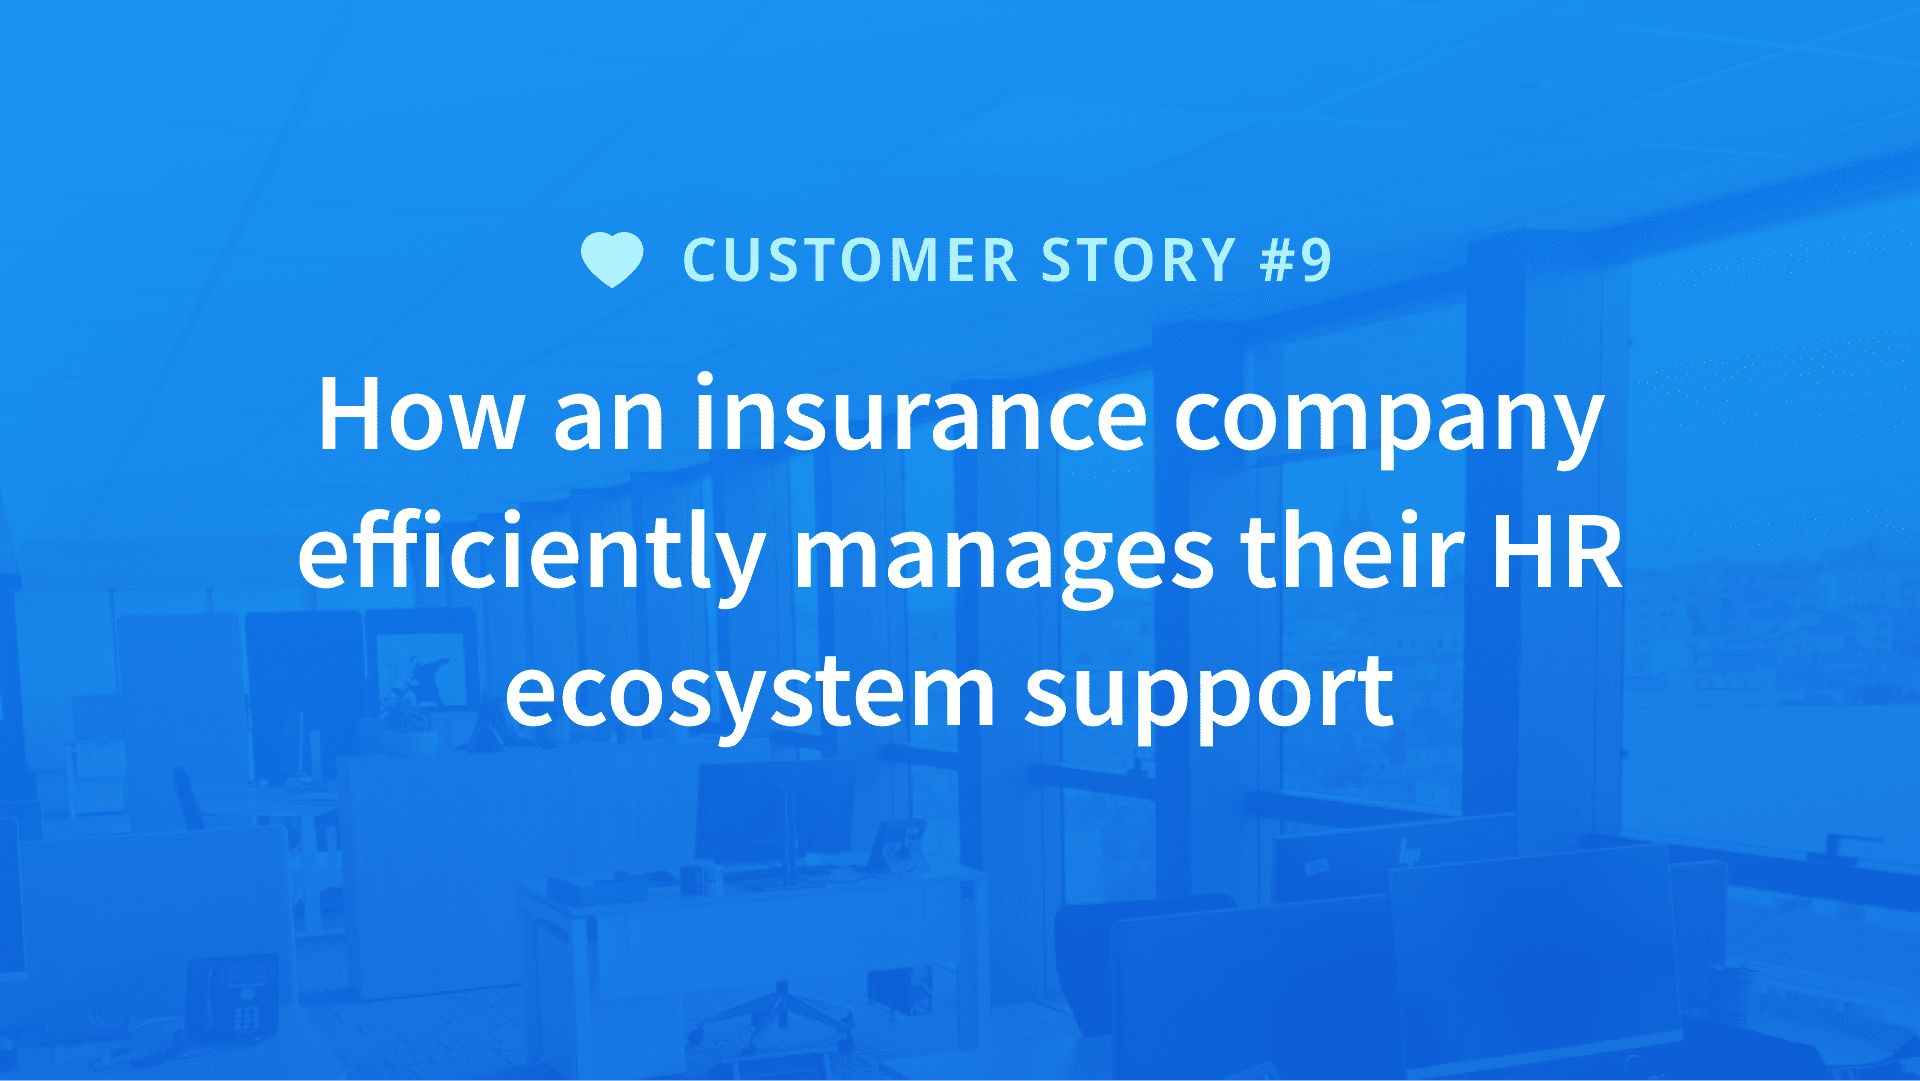 How an insurance company efficiently manages their HR ecosystem support